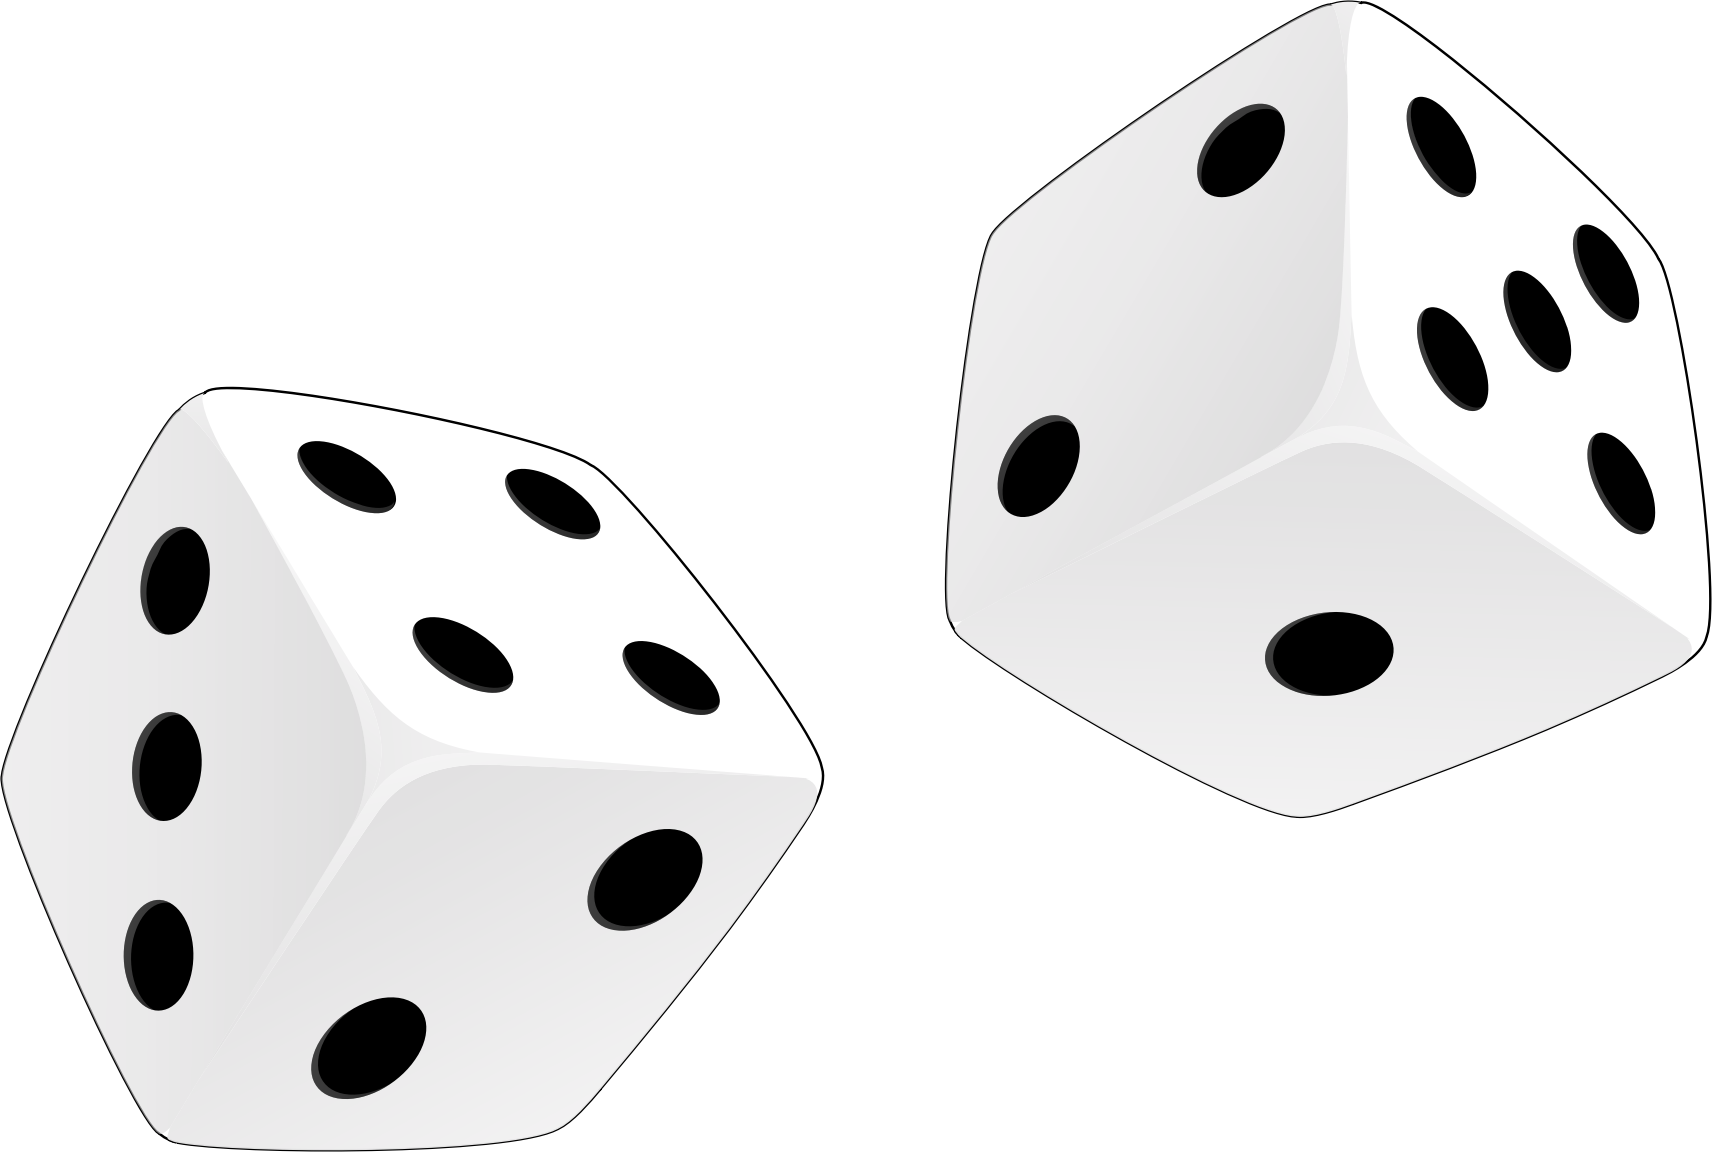 Dice clipart pictures